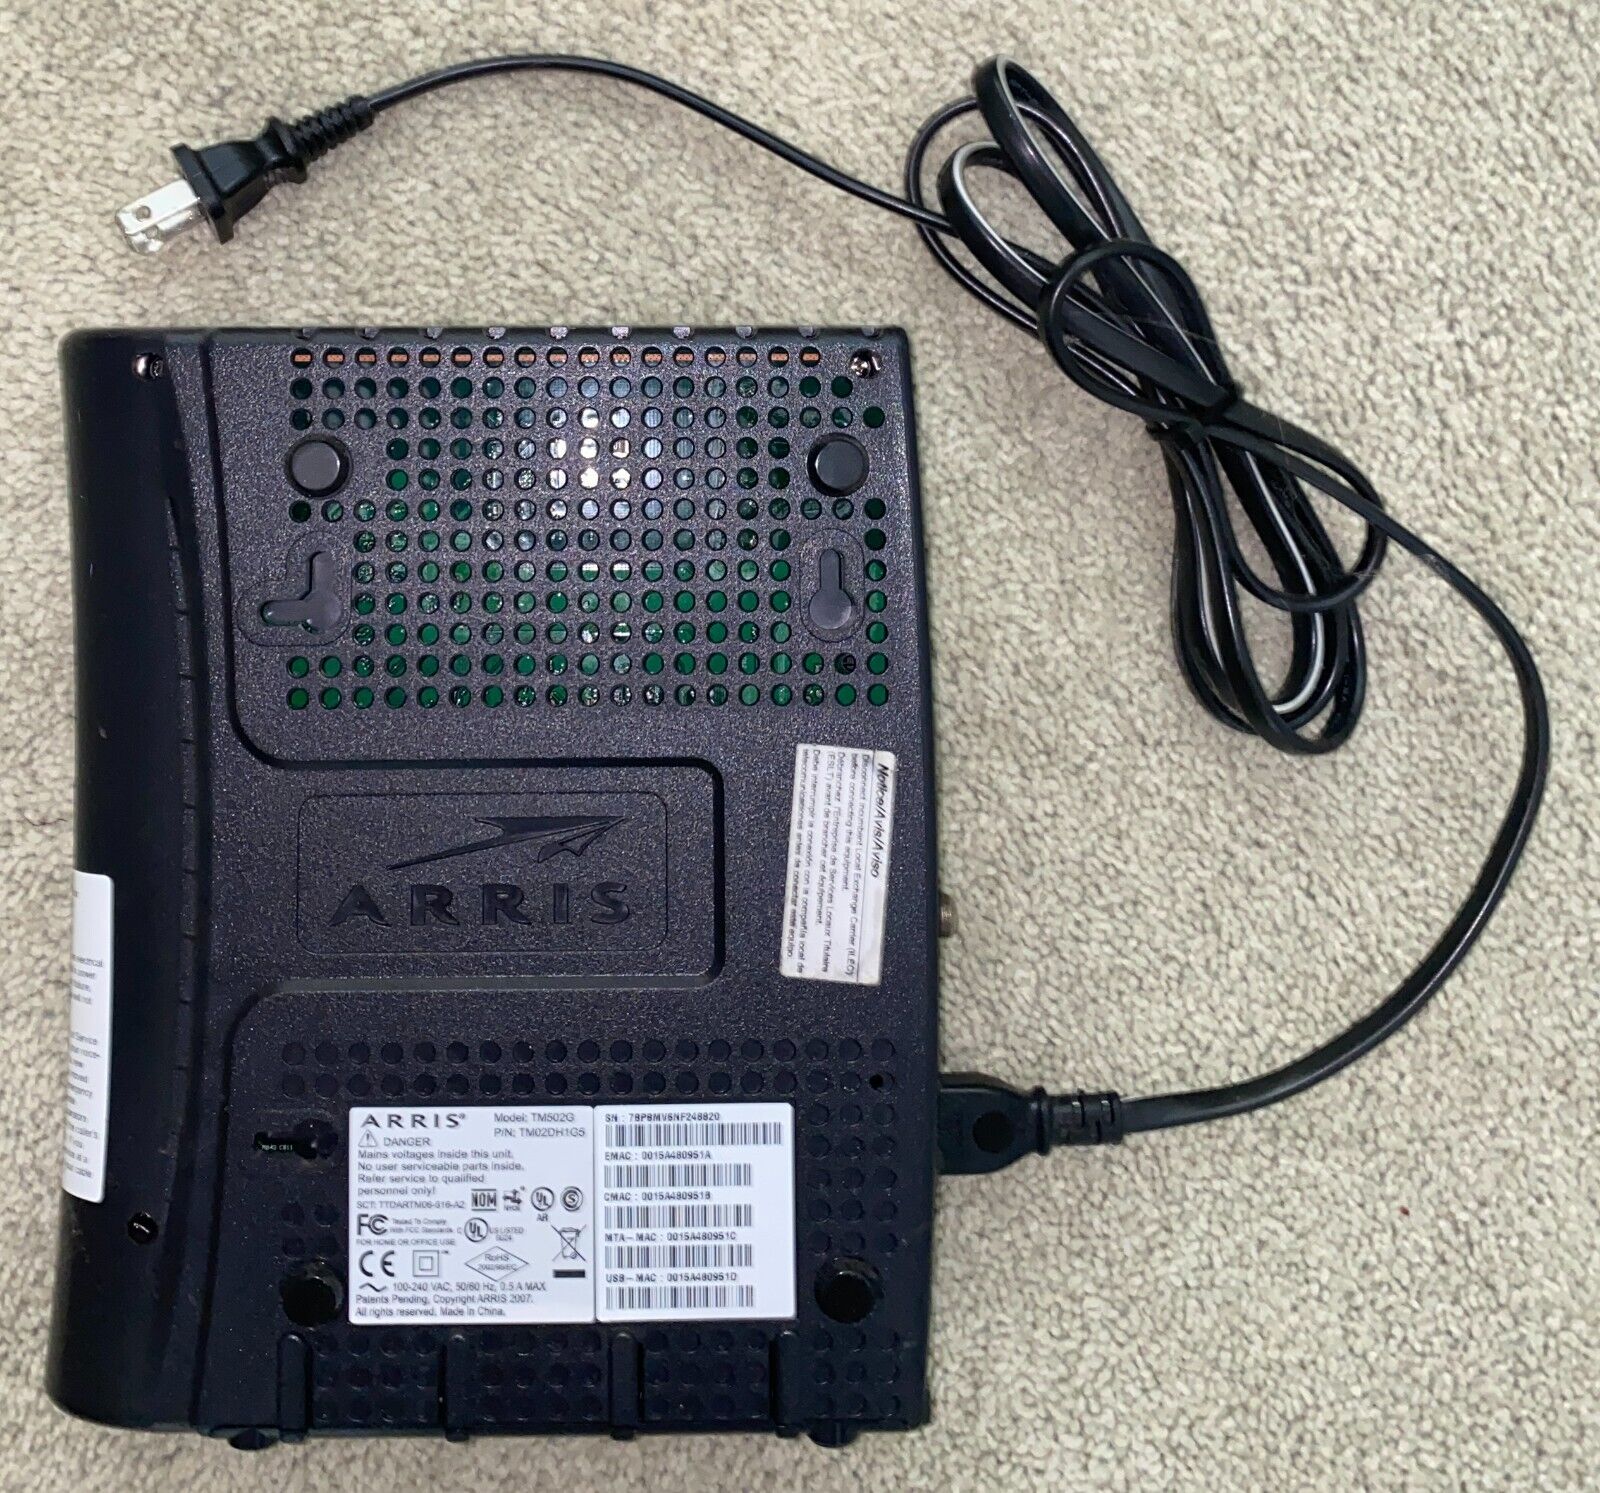 ARRIS Cable Modem with Telephony Model - TM502G Part Number - TM02DH1G5